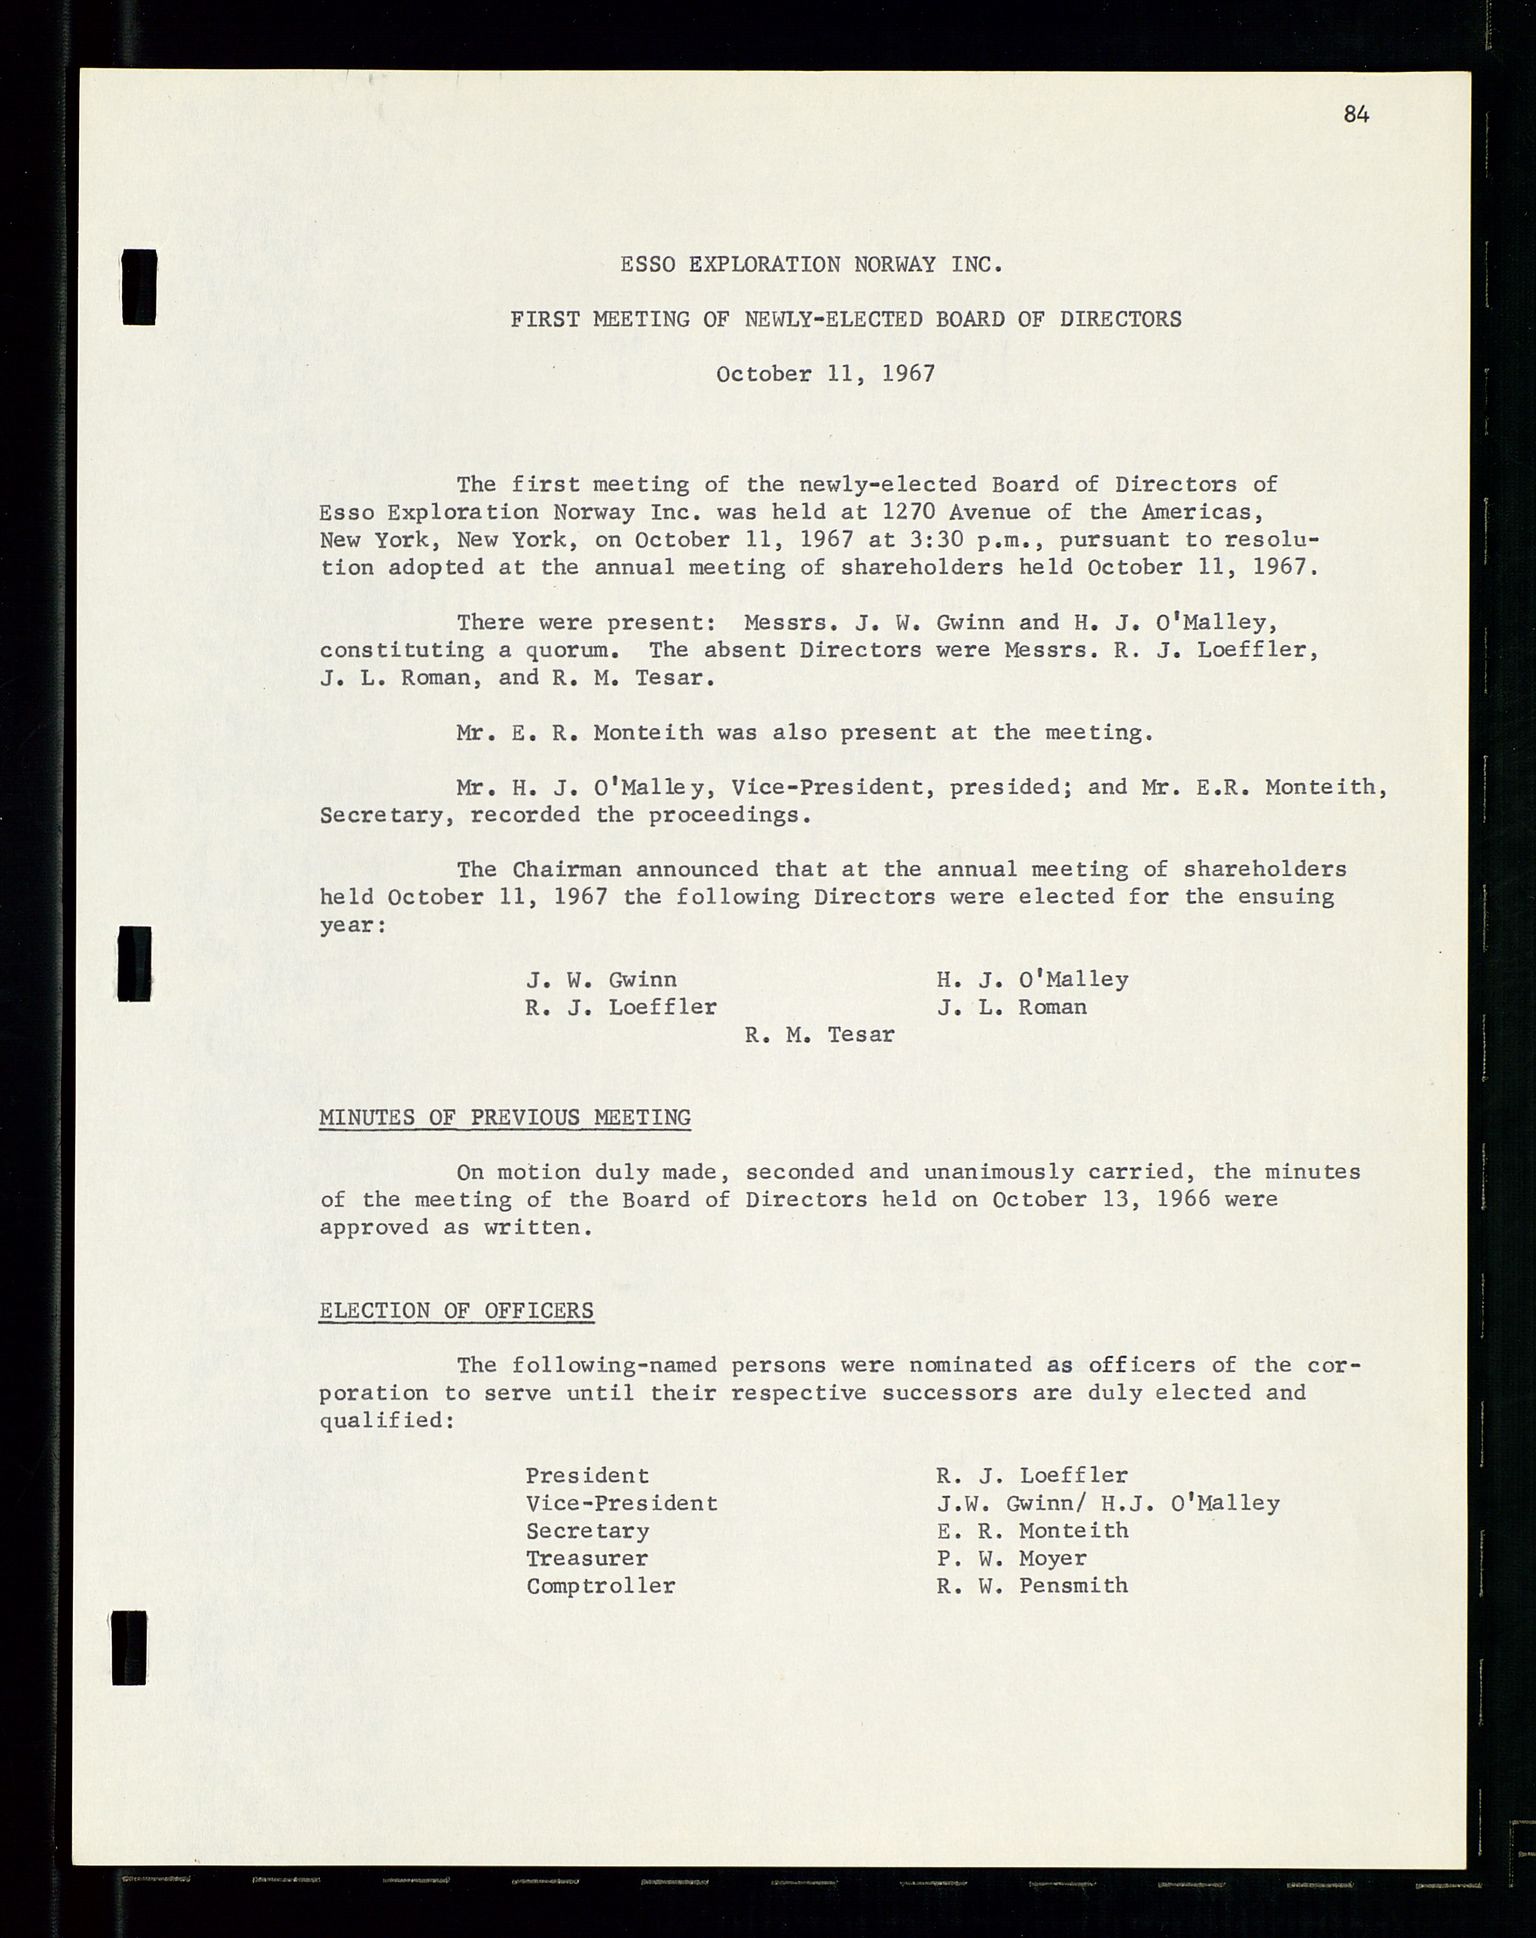 Pa 1512 - Esso Exploration and Production Norway Inc., SAST/A-101917/A/Aa/L0001/0001: Styredokumenter / Corporate records, By-Laws, Board meeting minutes, Incorporations, 1965-1975, p. 84